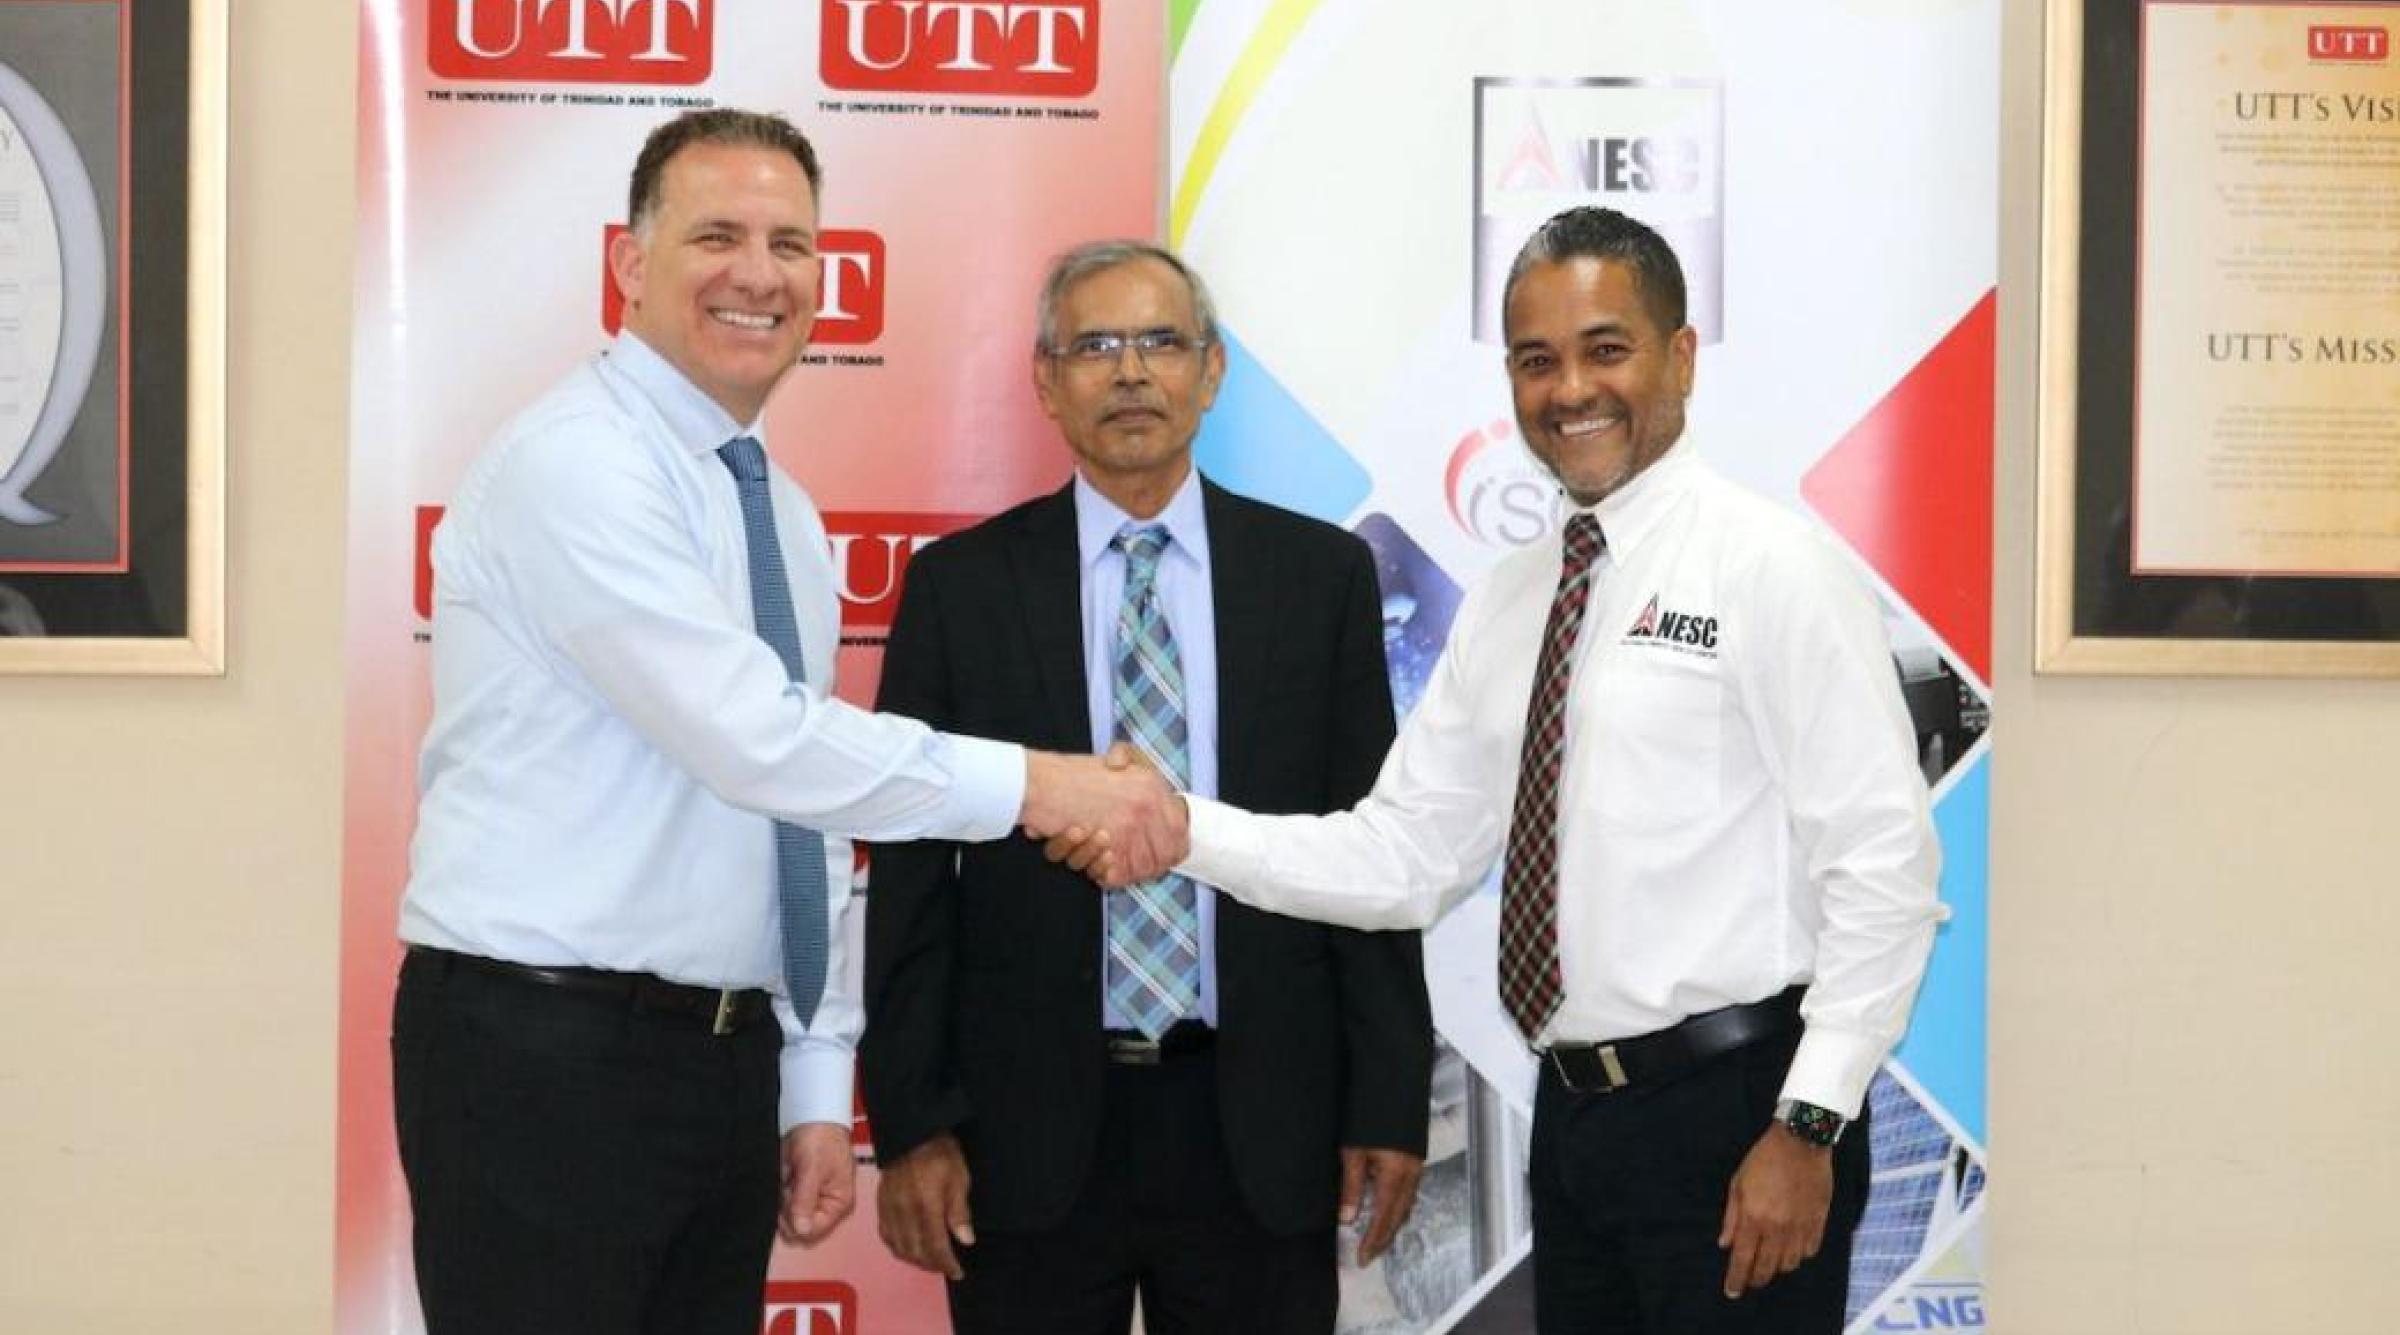 RDP, NESC and University of Trinidad and Tobago agreement